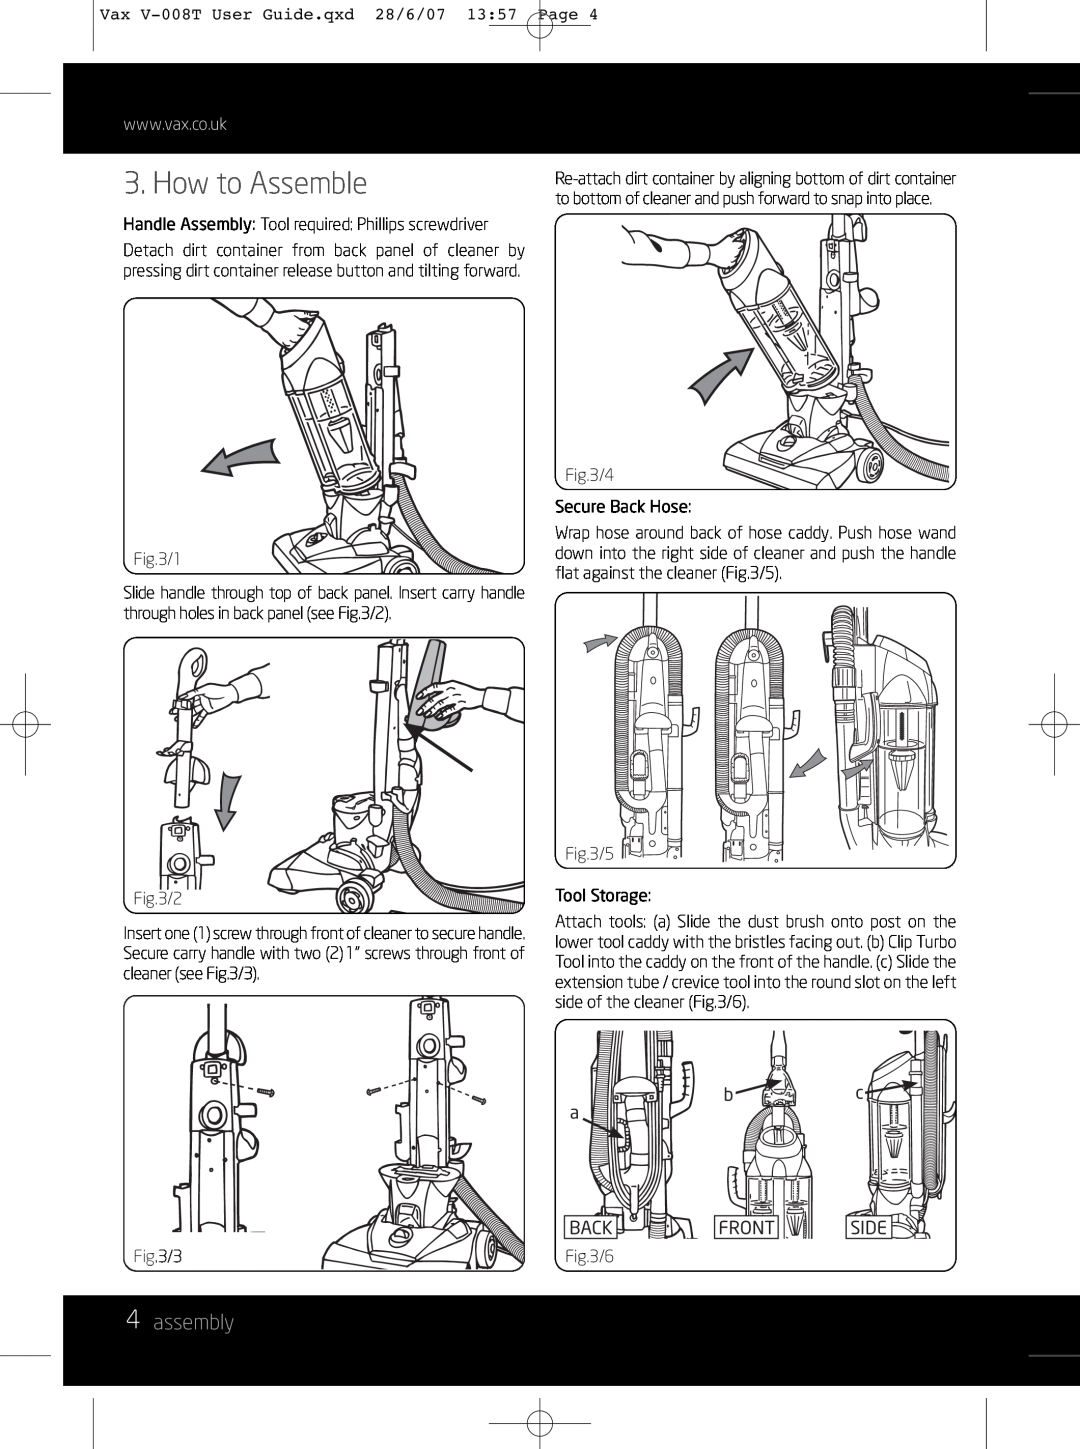 Vax V-008T instruction manual How to Assemble, 4assembly 